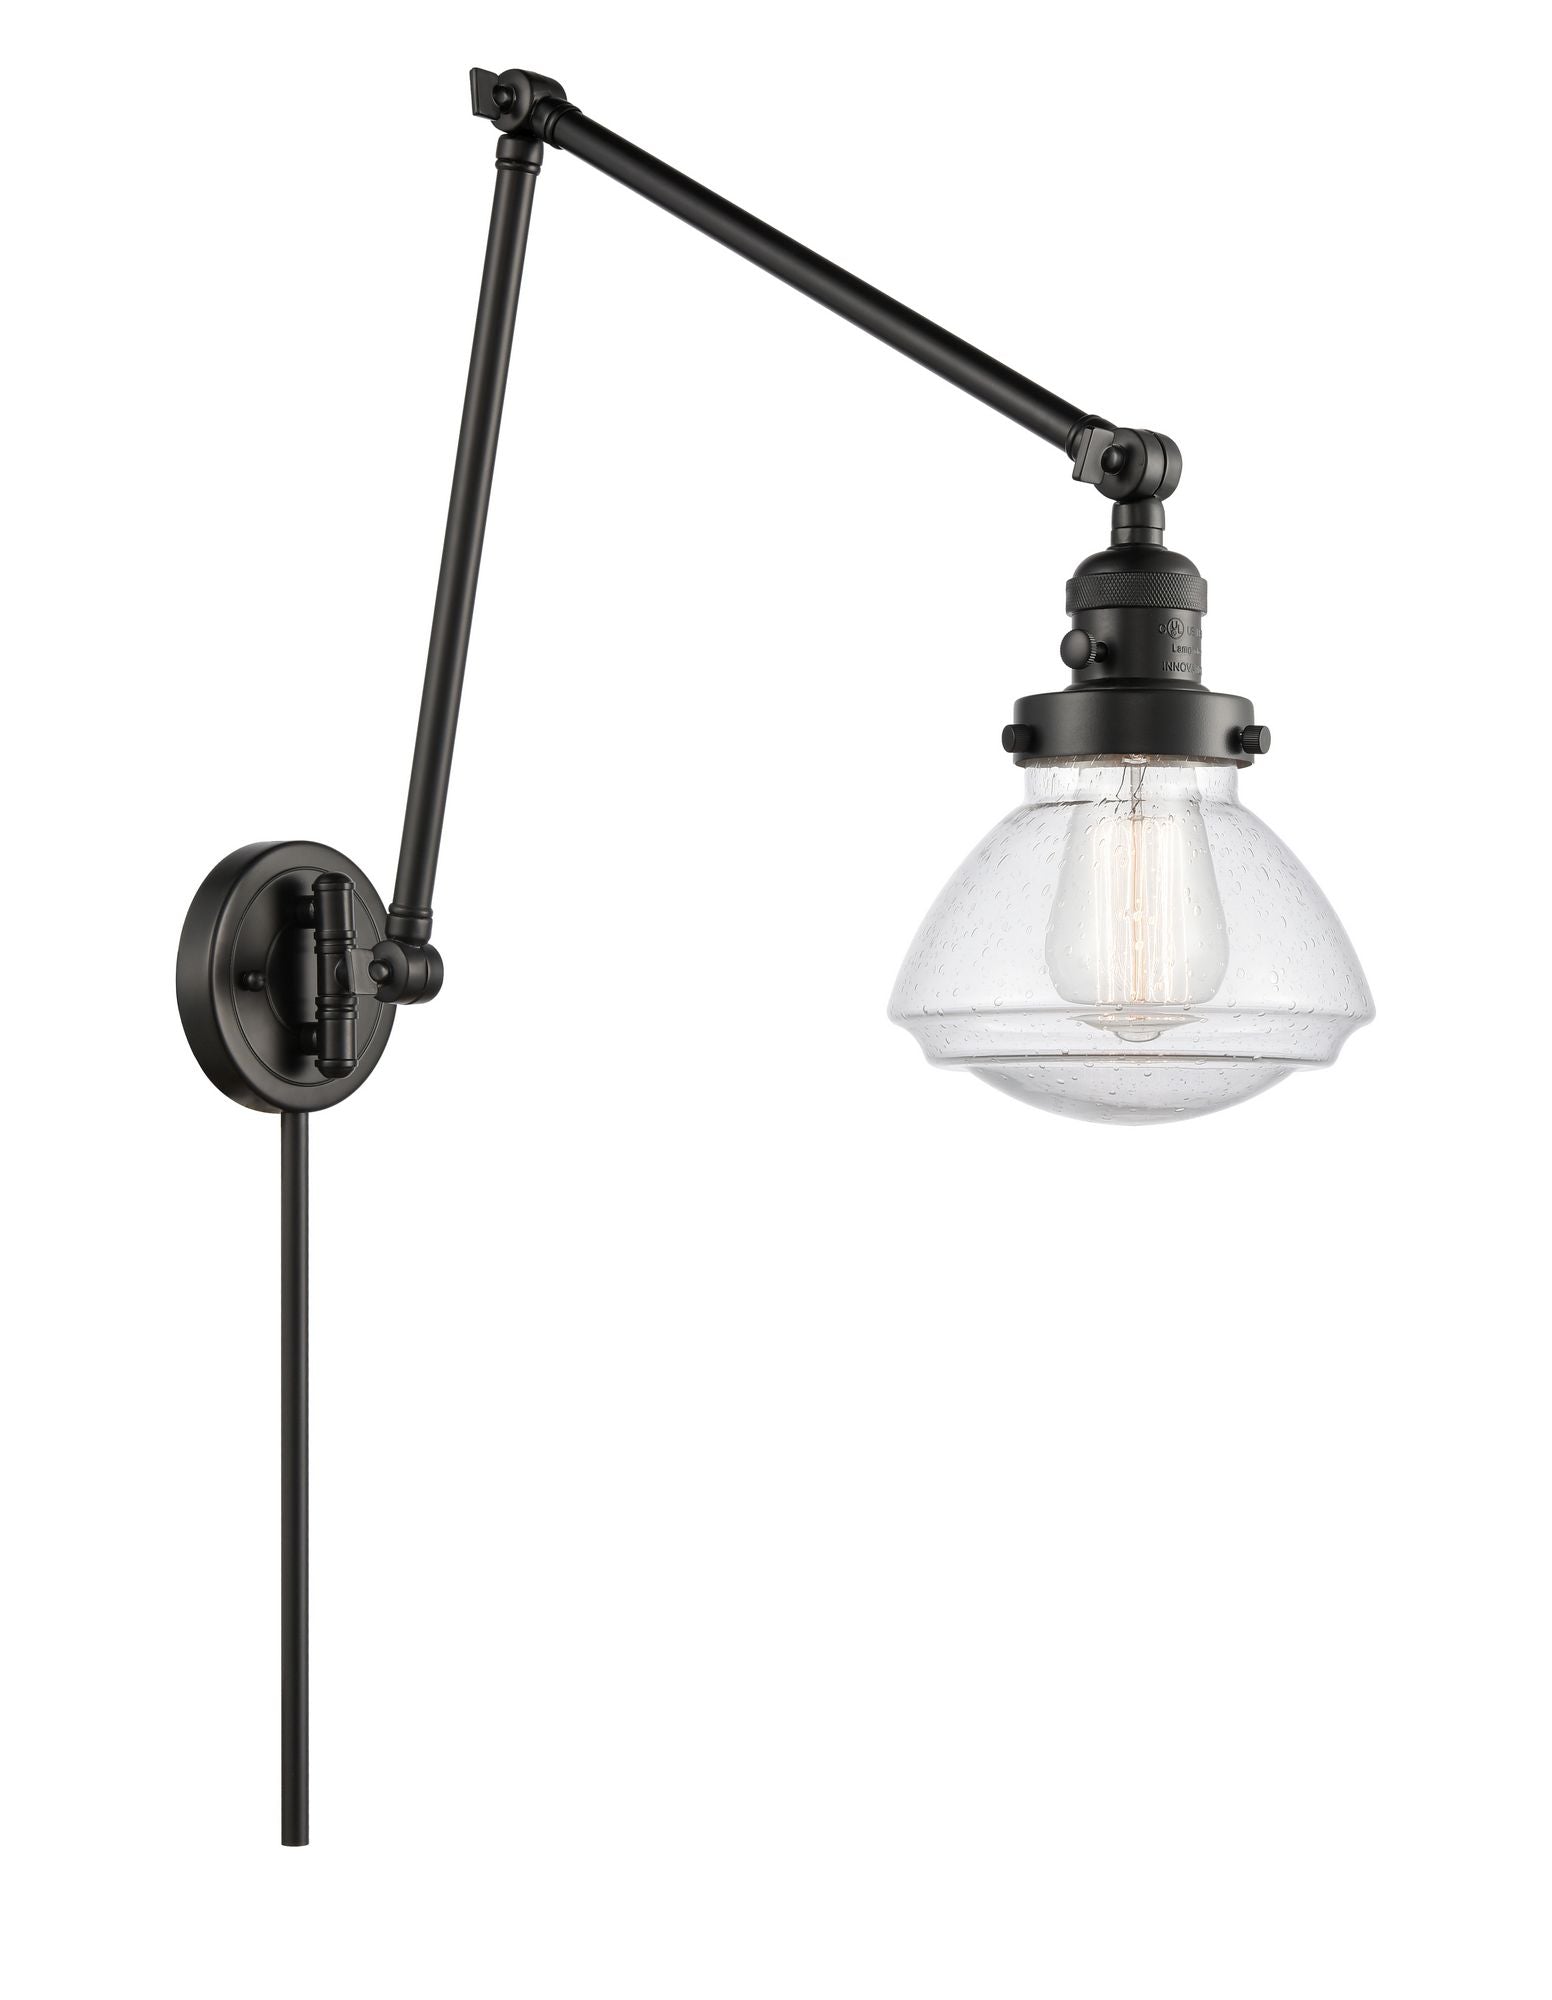 238-BK-G324 1-Light 8.75" Matte Black Swing Arm - Seedy Olean Glass - LED Bulb - Dimmensions: 8.75 x 28.125 x 27.75 - Glass Up or Down: Yes